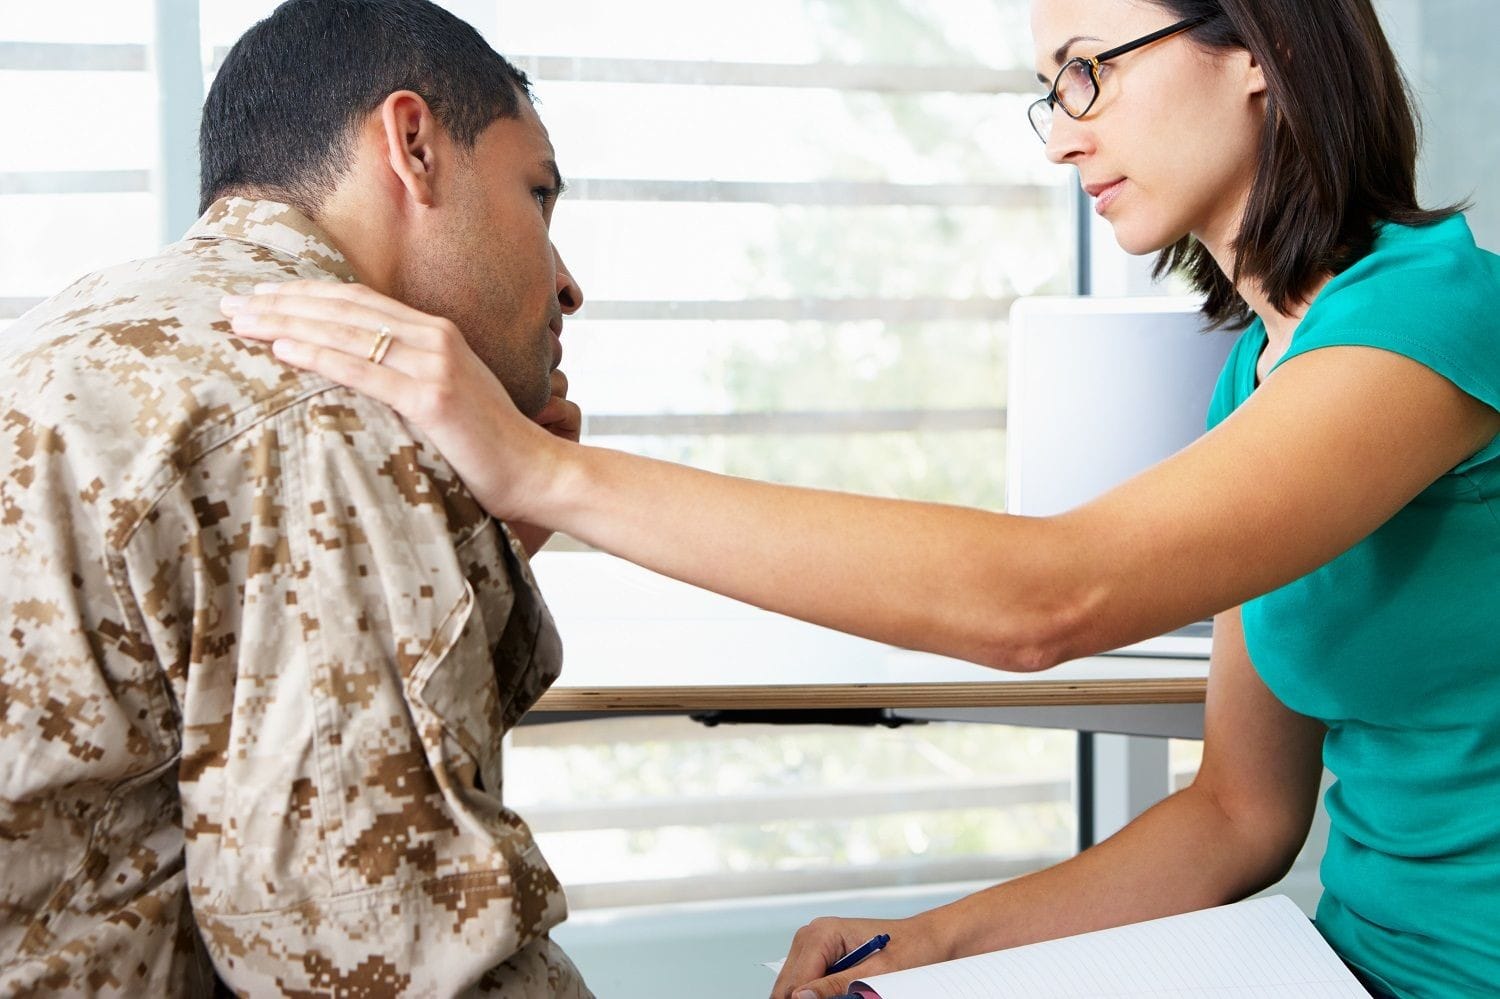 Veterans’ health and wellbeing